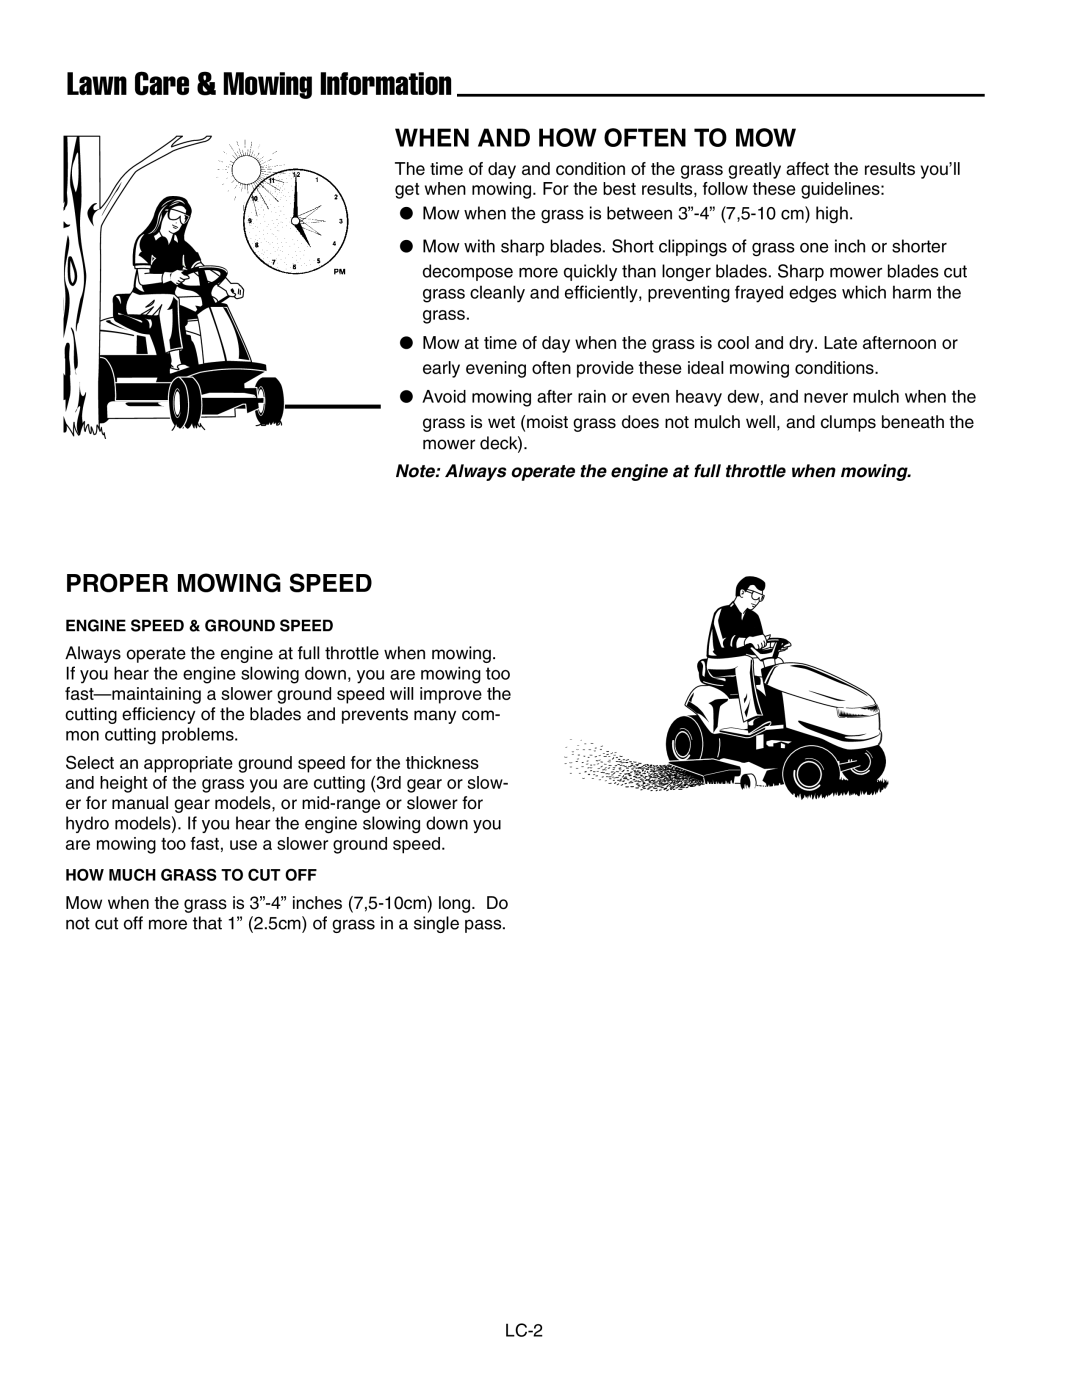 Snapper 400 Series manual When And How Often To Mow, Proper Mowing Speed, Lawn Care & Mowing Information 